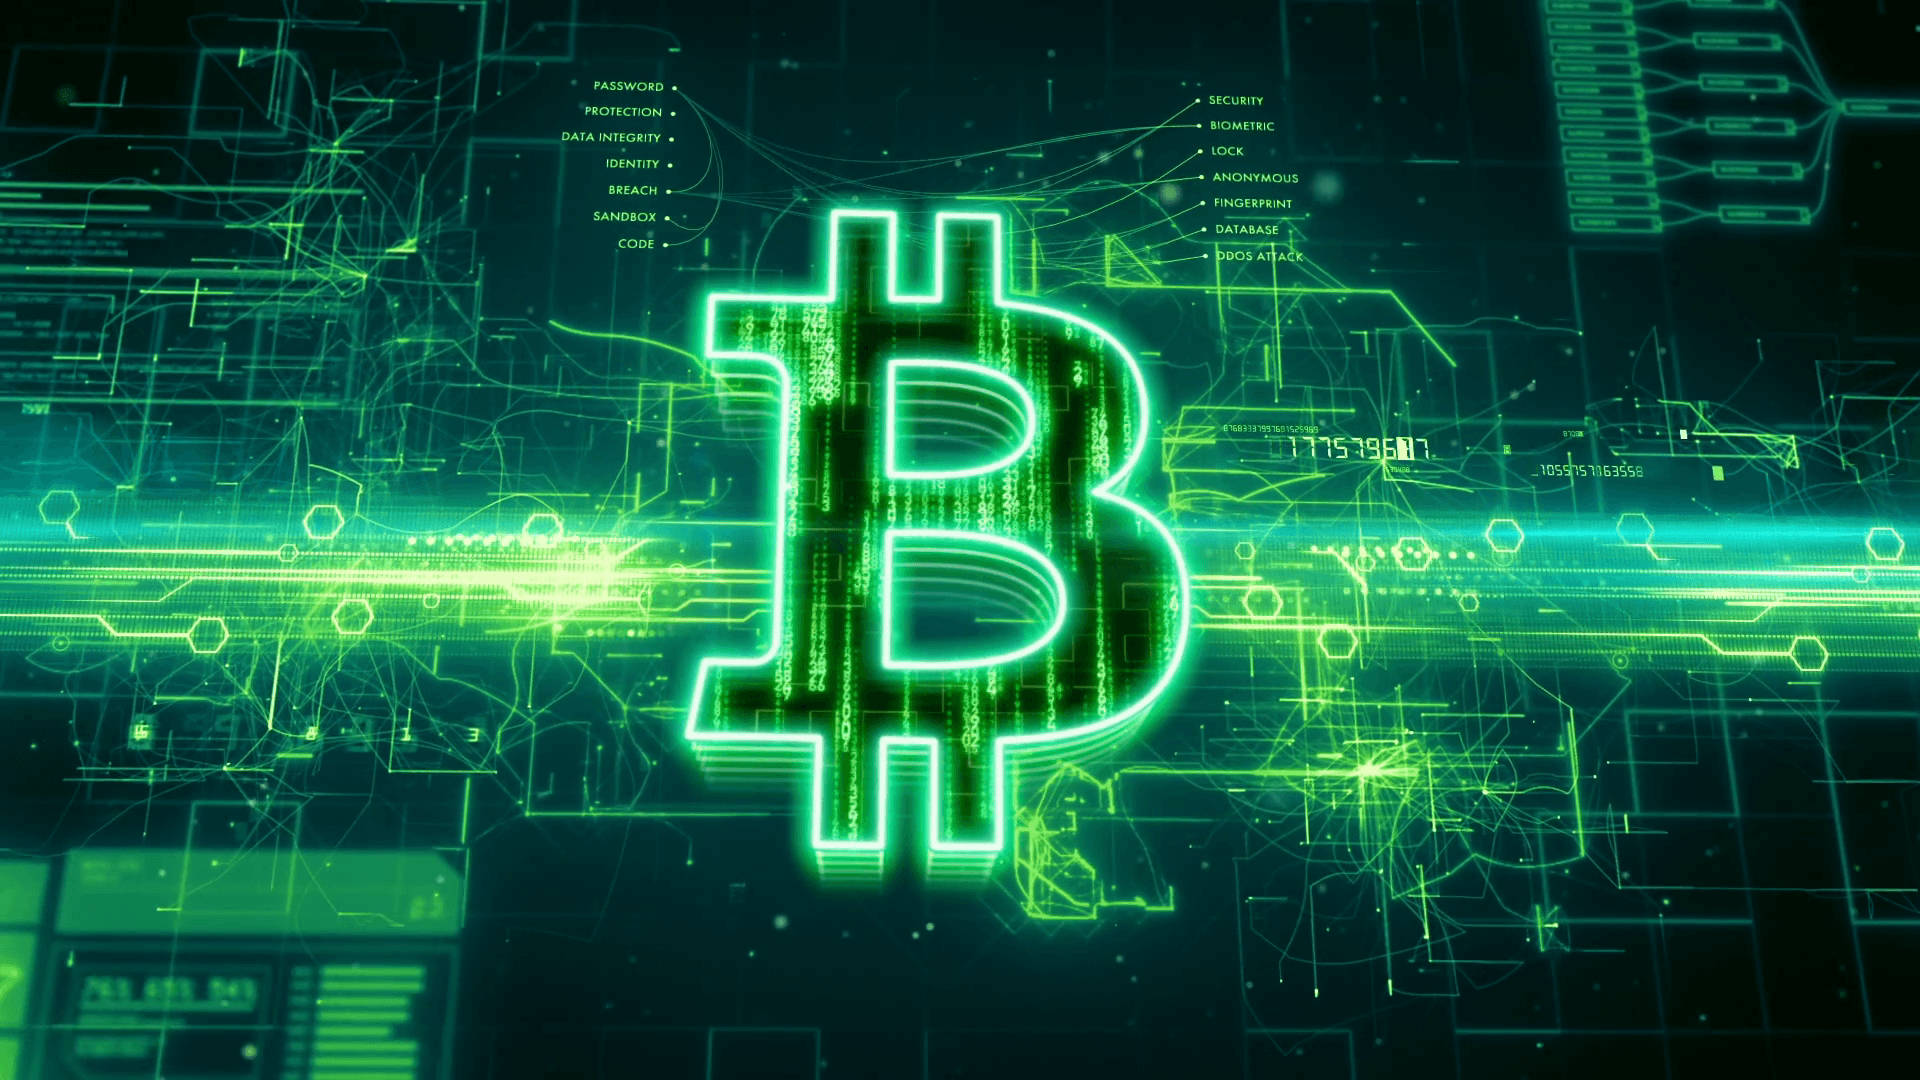 The Future of Money - Glowing Bitcoin Wallpaper